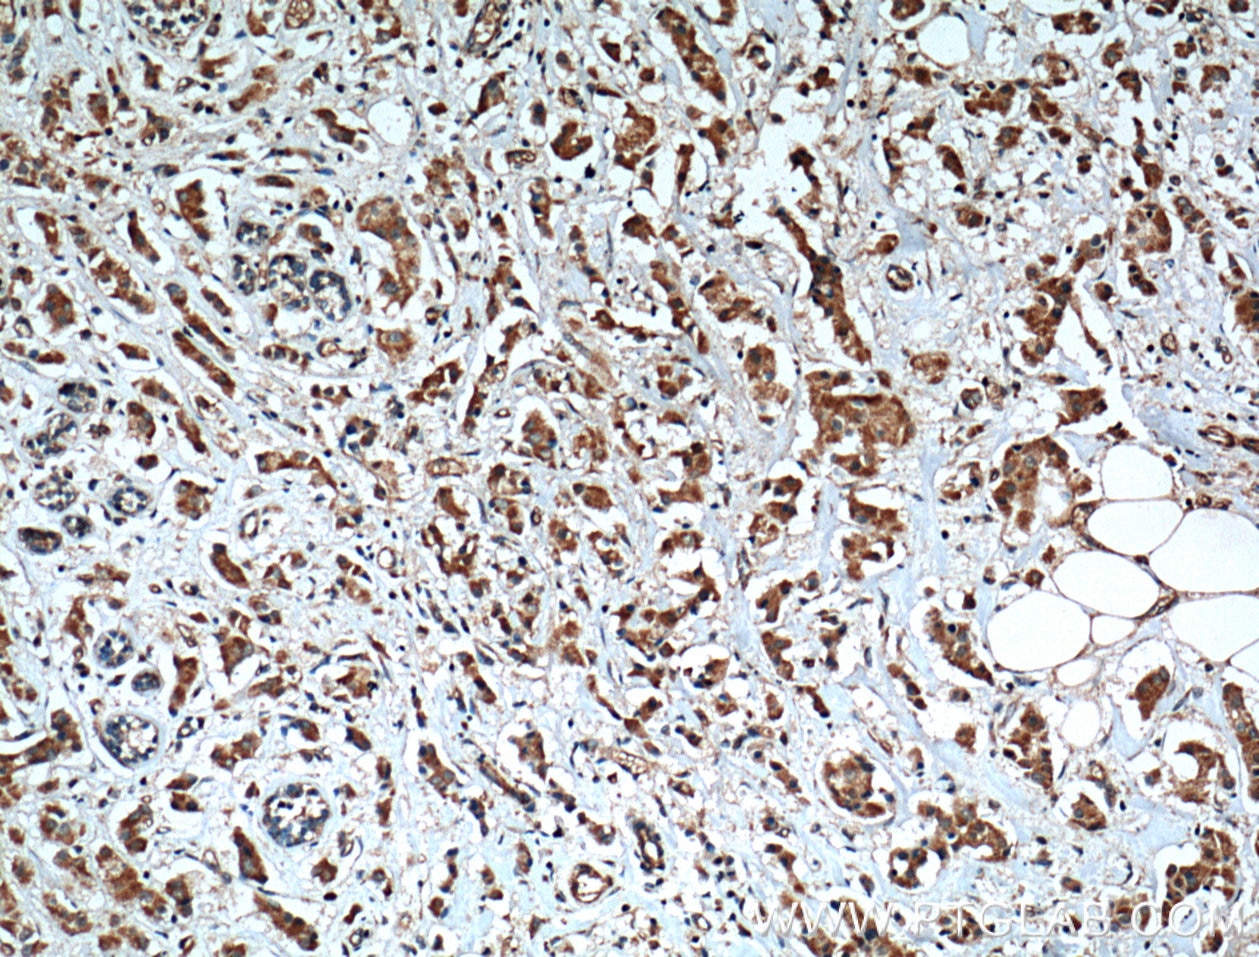 Immunohistochemistry (IHC) staining of human breast cancer tissue using XBP1S-specific Polyclonal antibody (24868-1-AP)